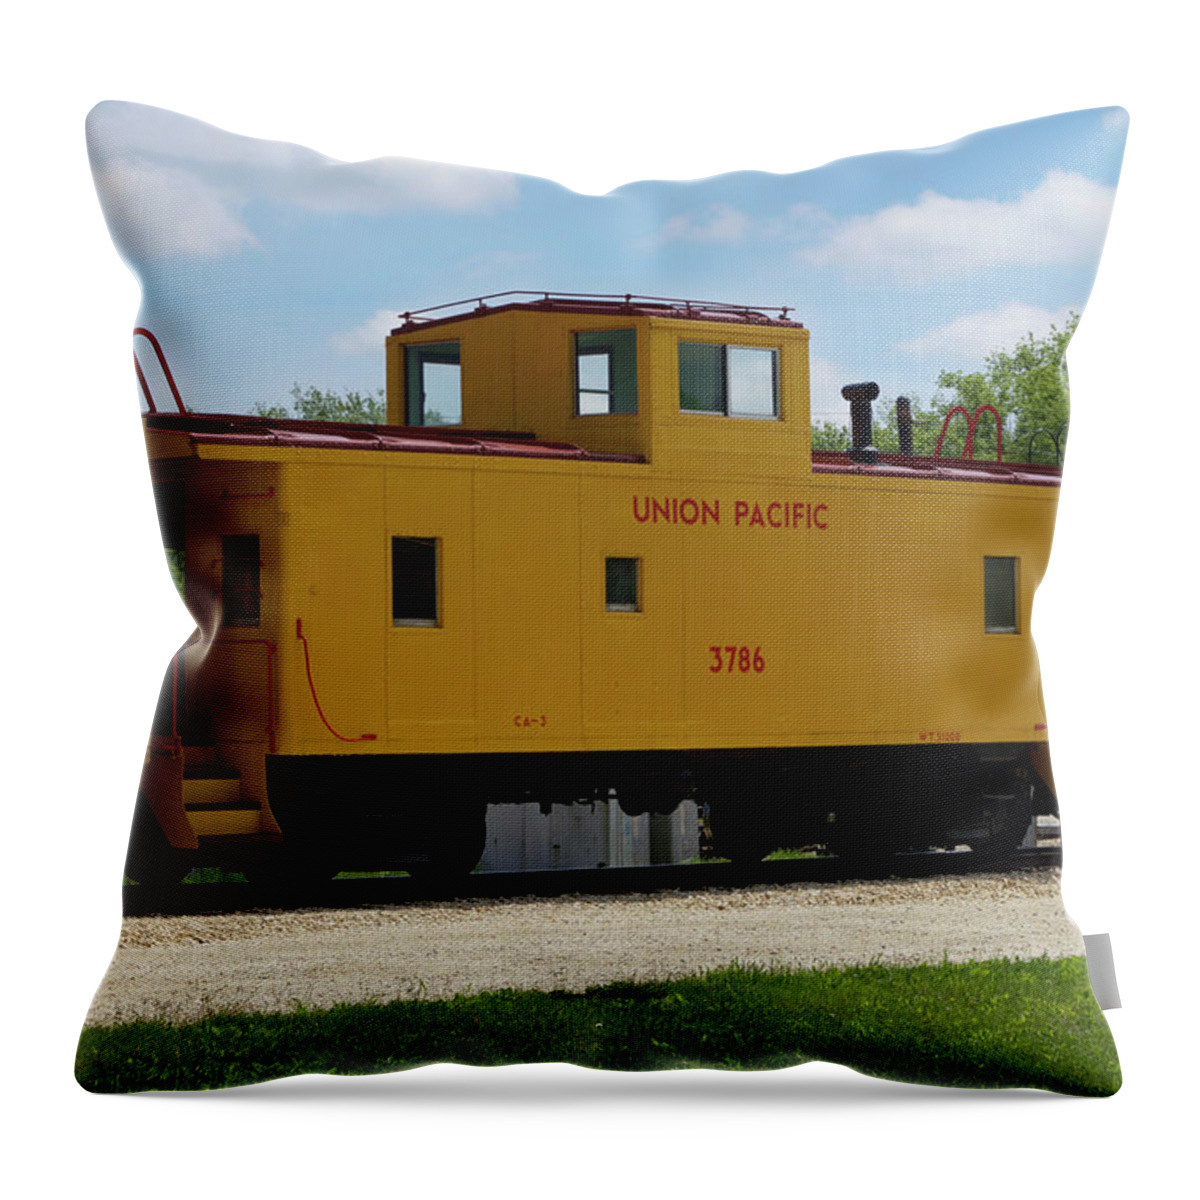 Caboose Throw Pillow featuring the photograph Trains Caboose 3786 Union Pacific by Thomas Woolworth